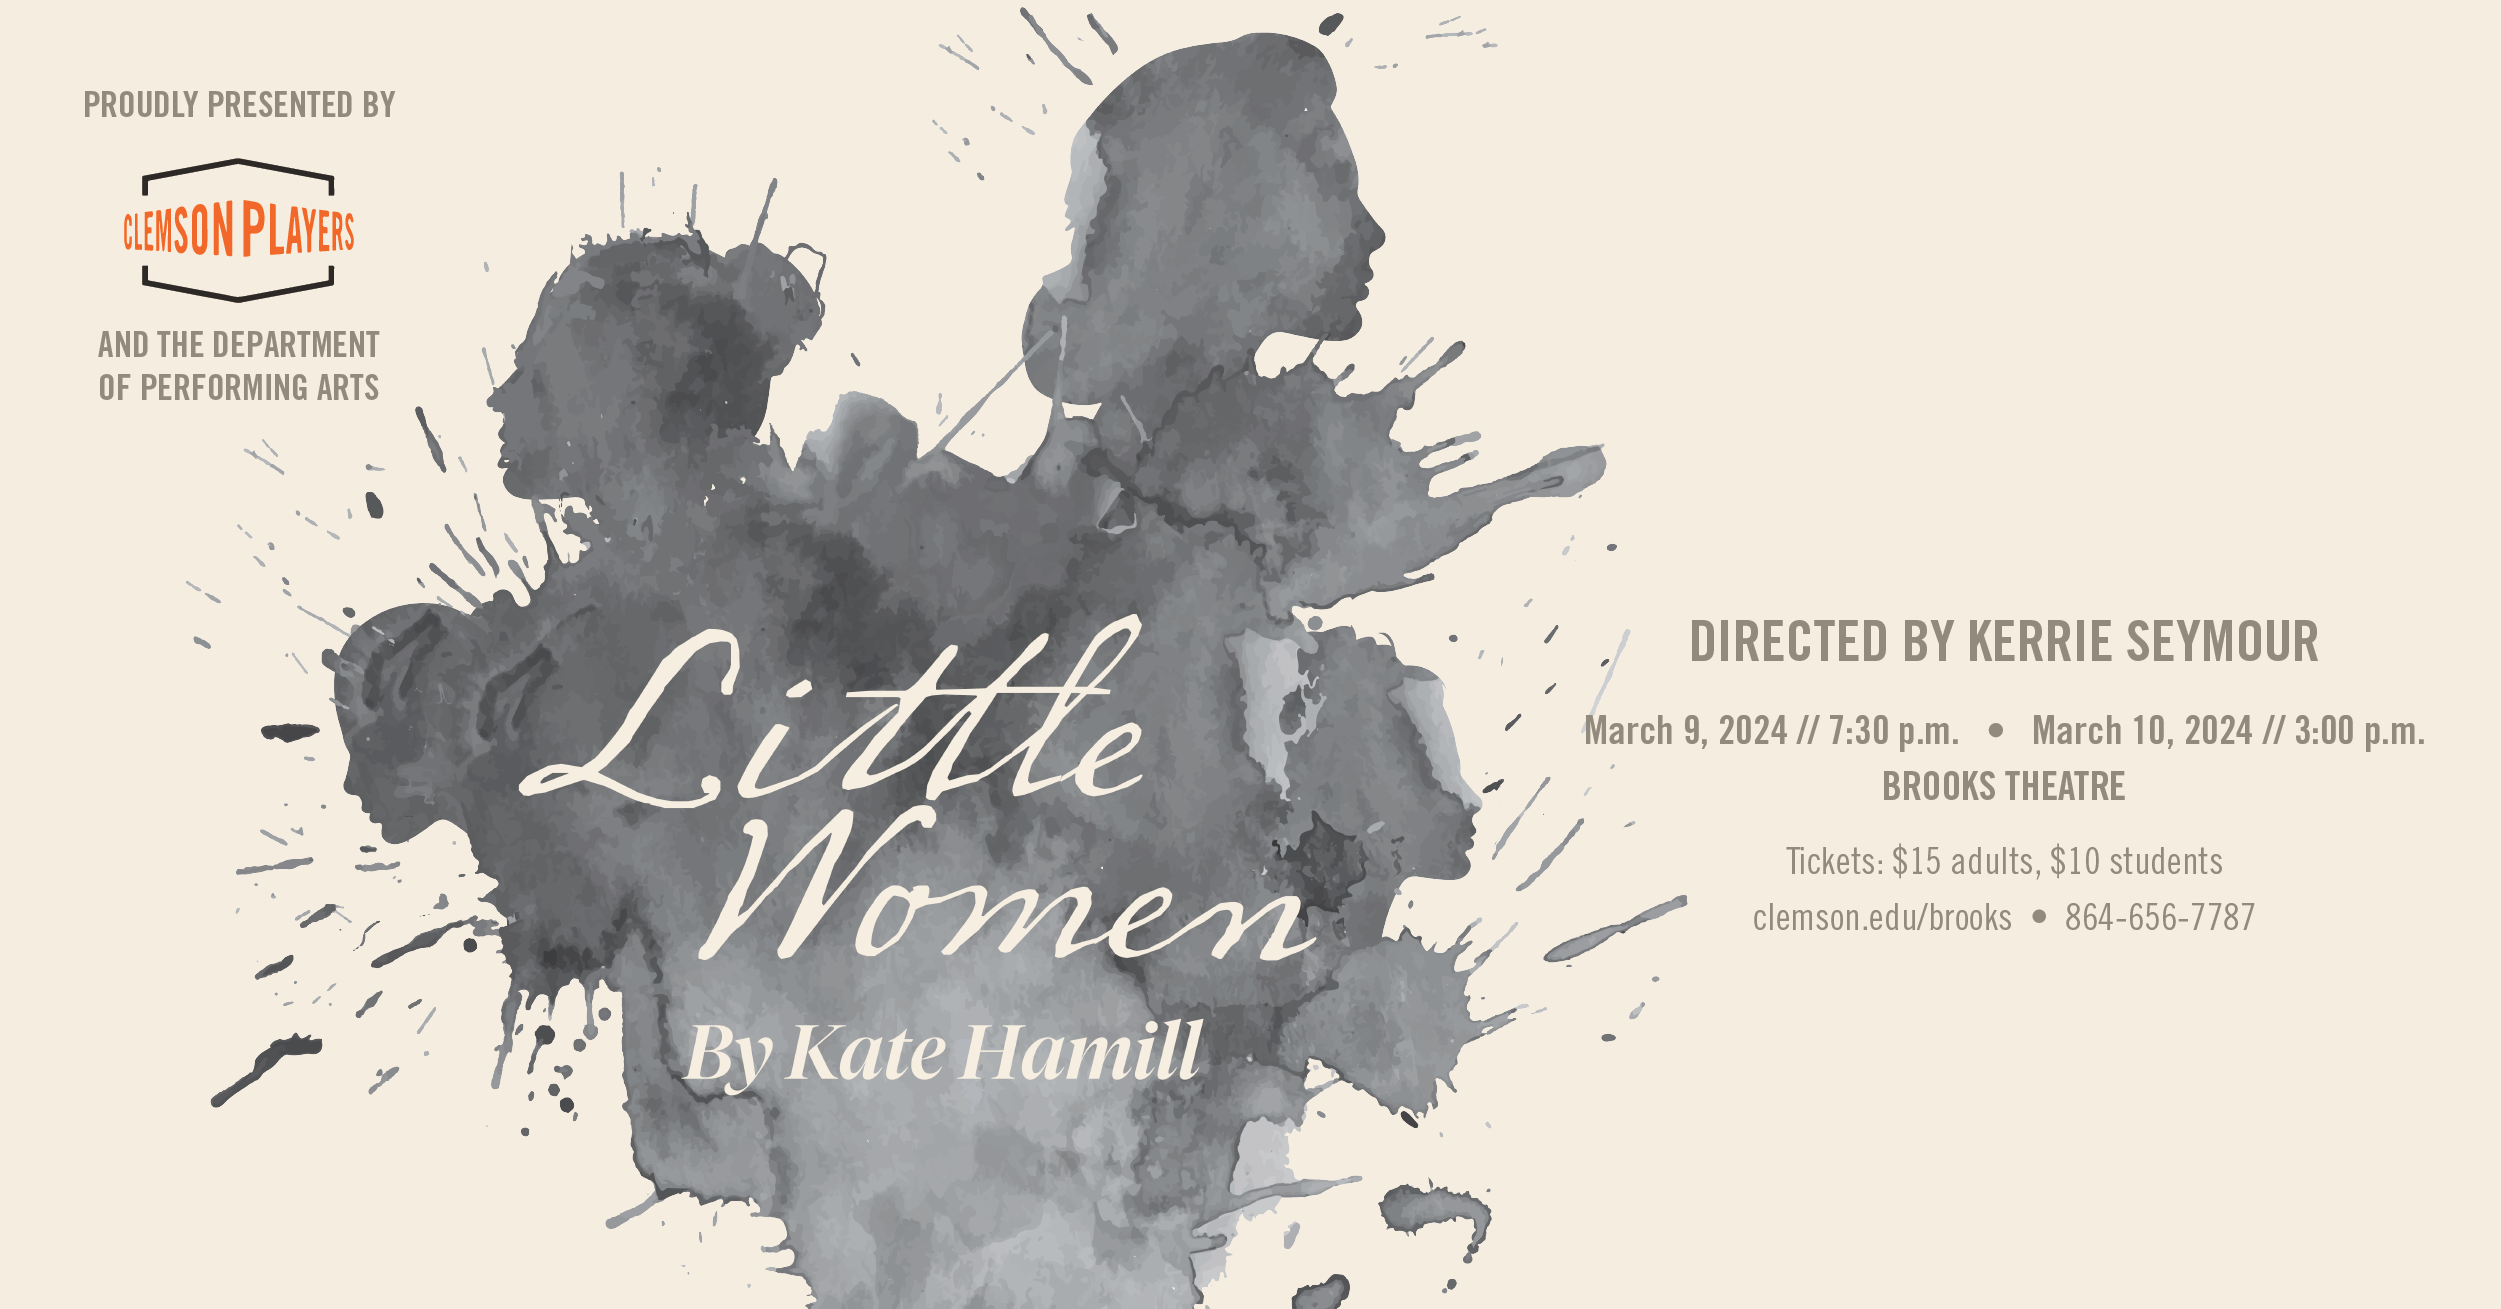 This is a digital banner promoting "Little Women" performances in the Brooks Center for the Performing Arts in March 2024.